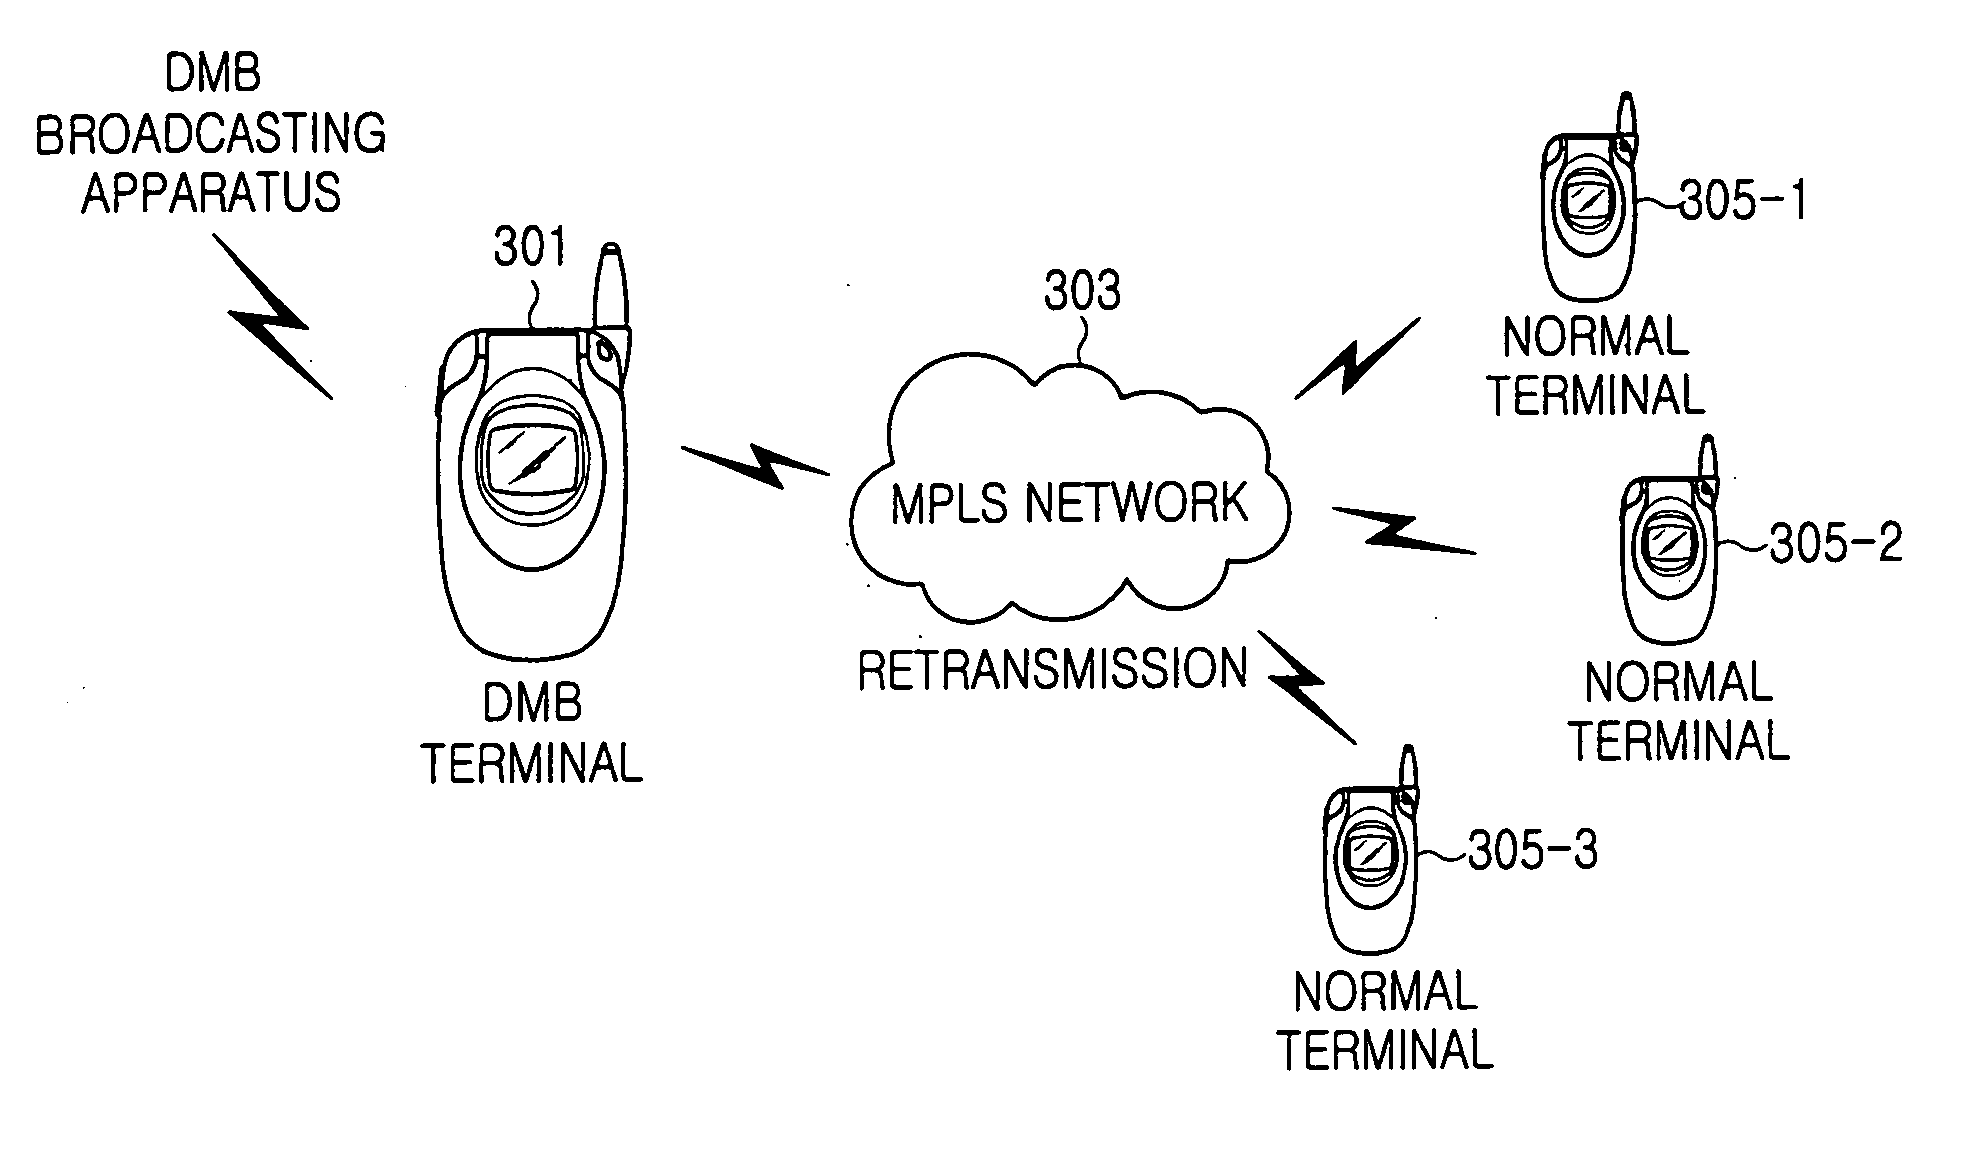 Packet based retransmission system for DMB service and apparatus therefor